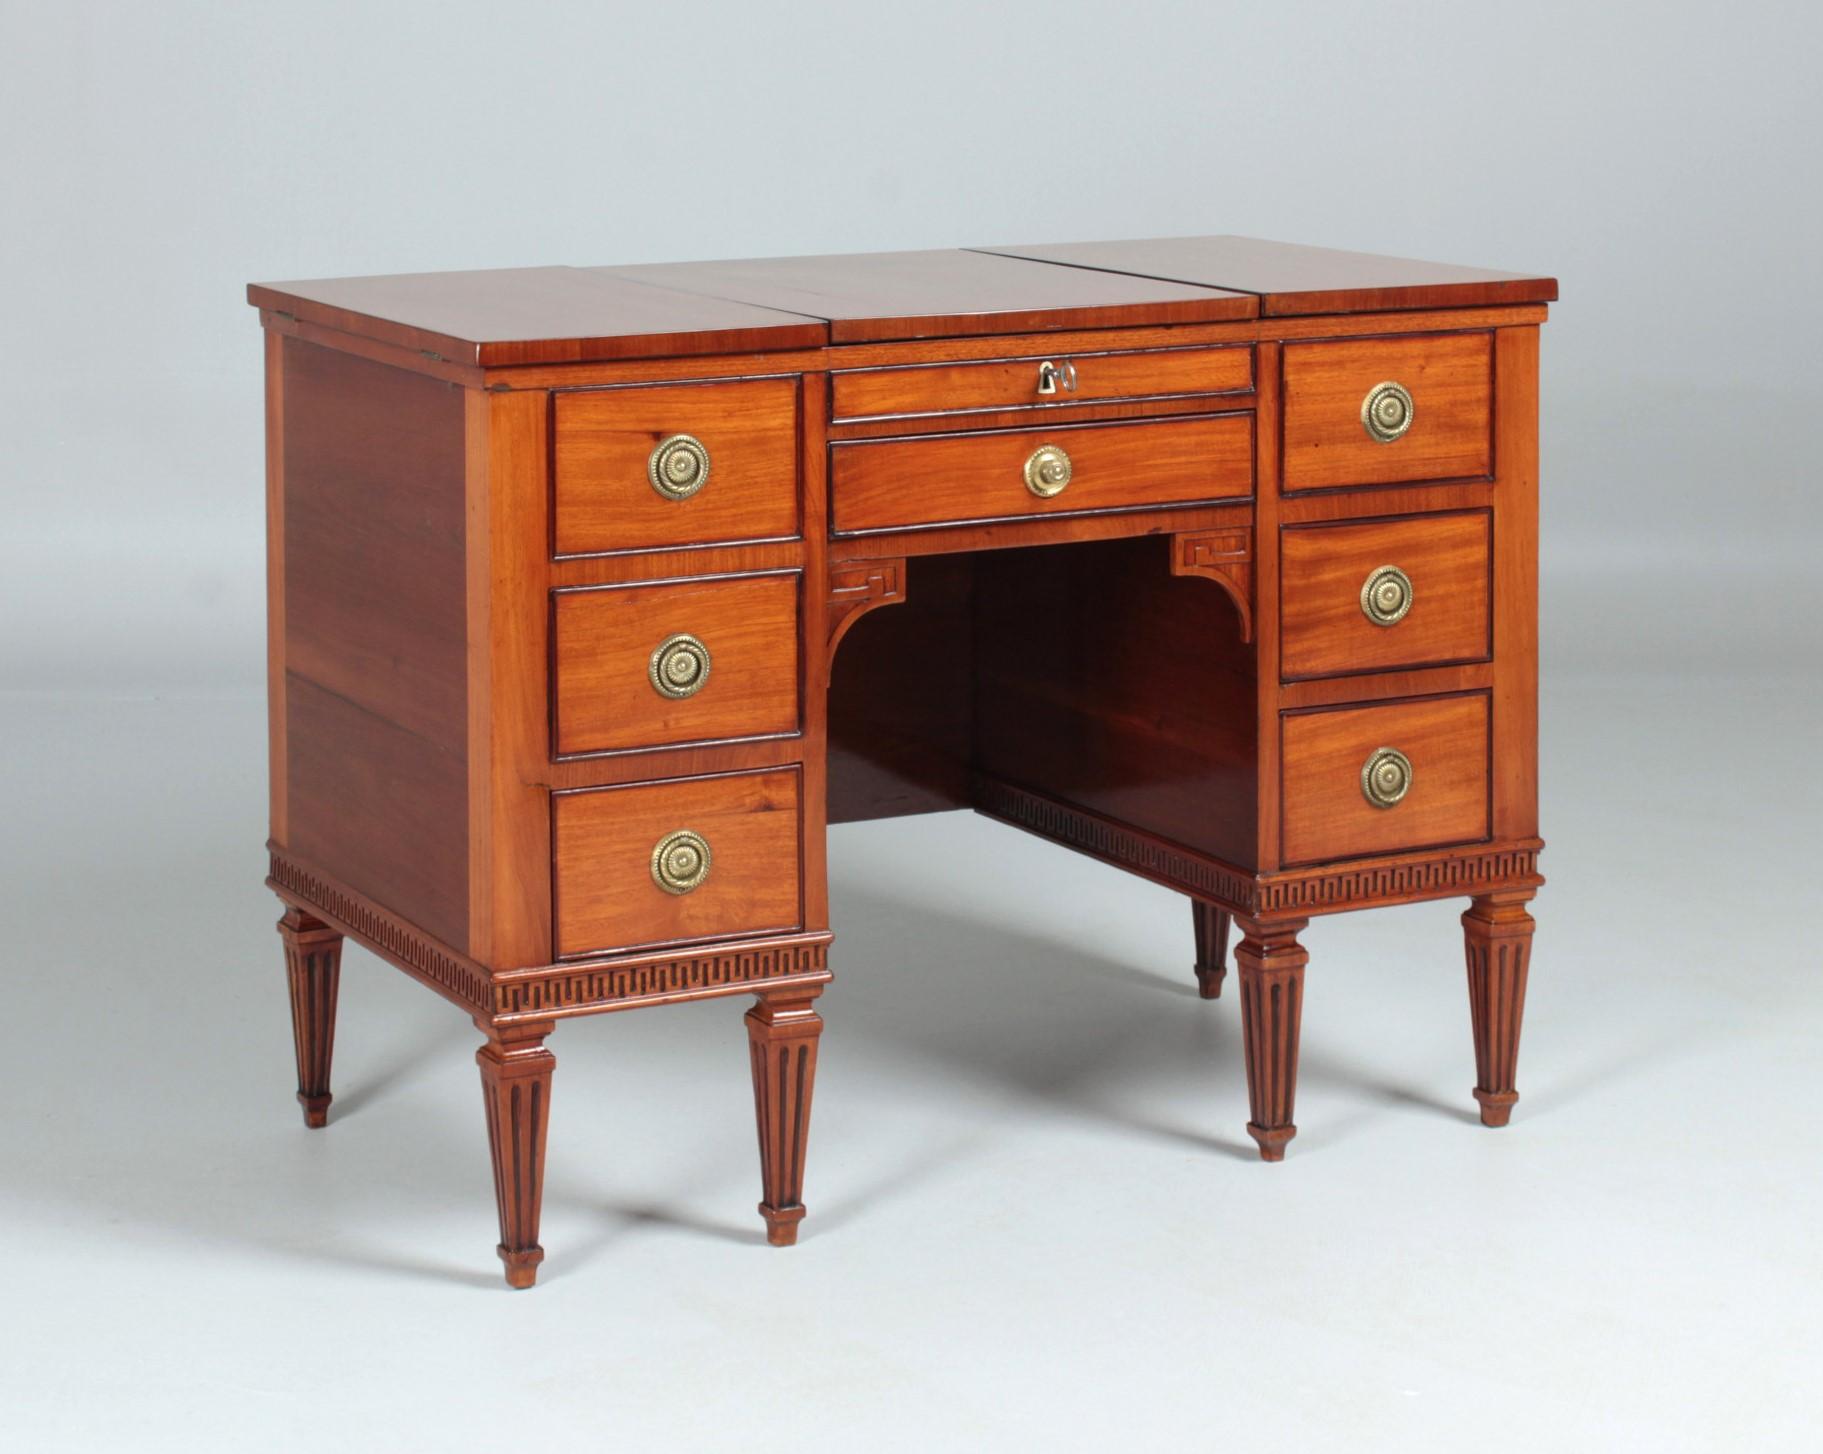 Small make-up and writing desk

South Germany
Louis XVI circa 1780

Dimensions: H x W x D: 74 x 96 x 52 cm

Description:
Antique multifunctional piece of furniture from the late 18th century.

Desk standing on fluted and downwardly tapering pointed